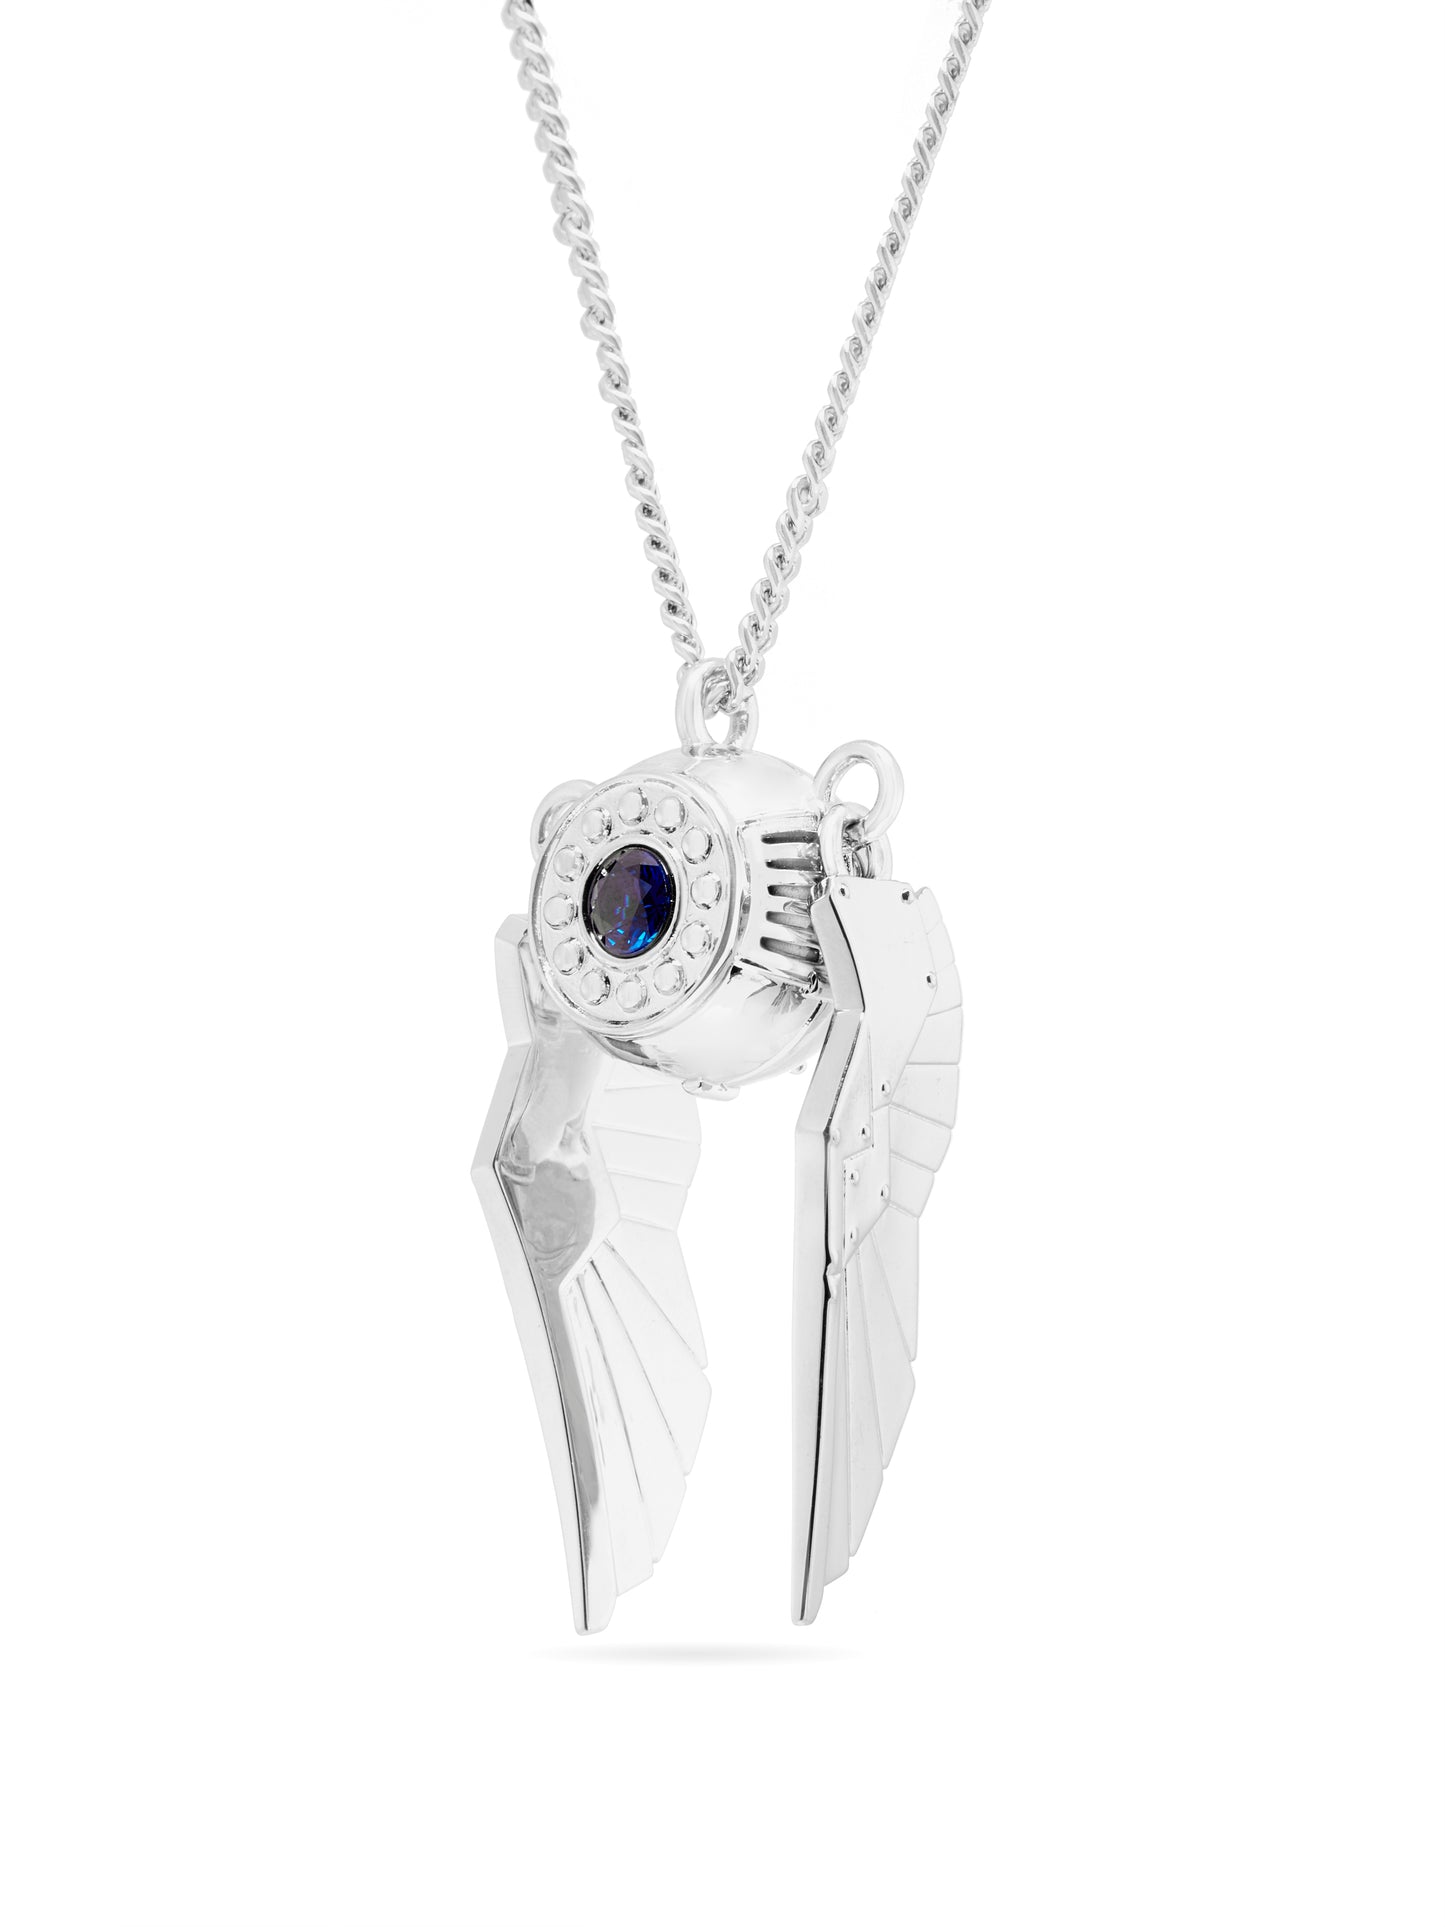 Tomorrow's Girl Series - Angel Eye Necklace (Silver)